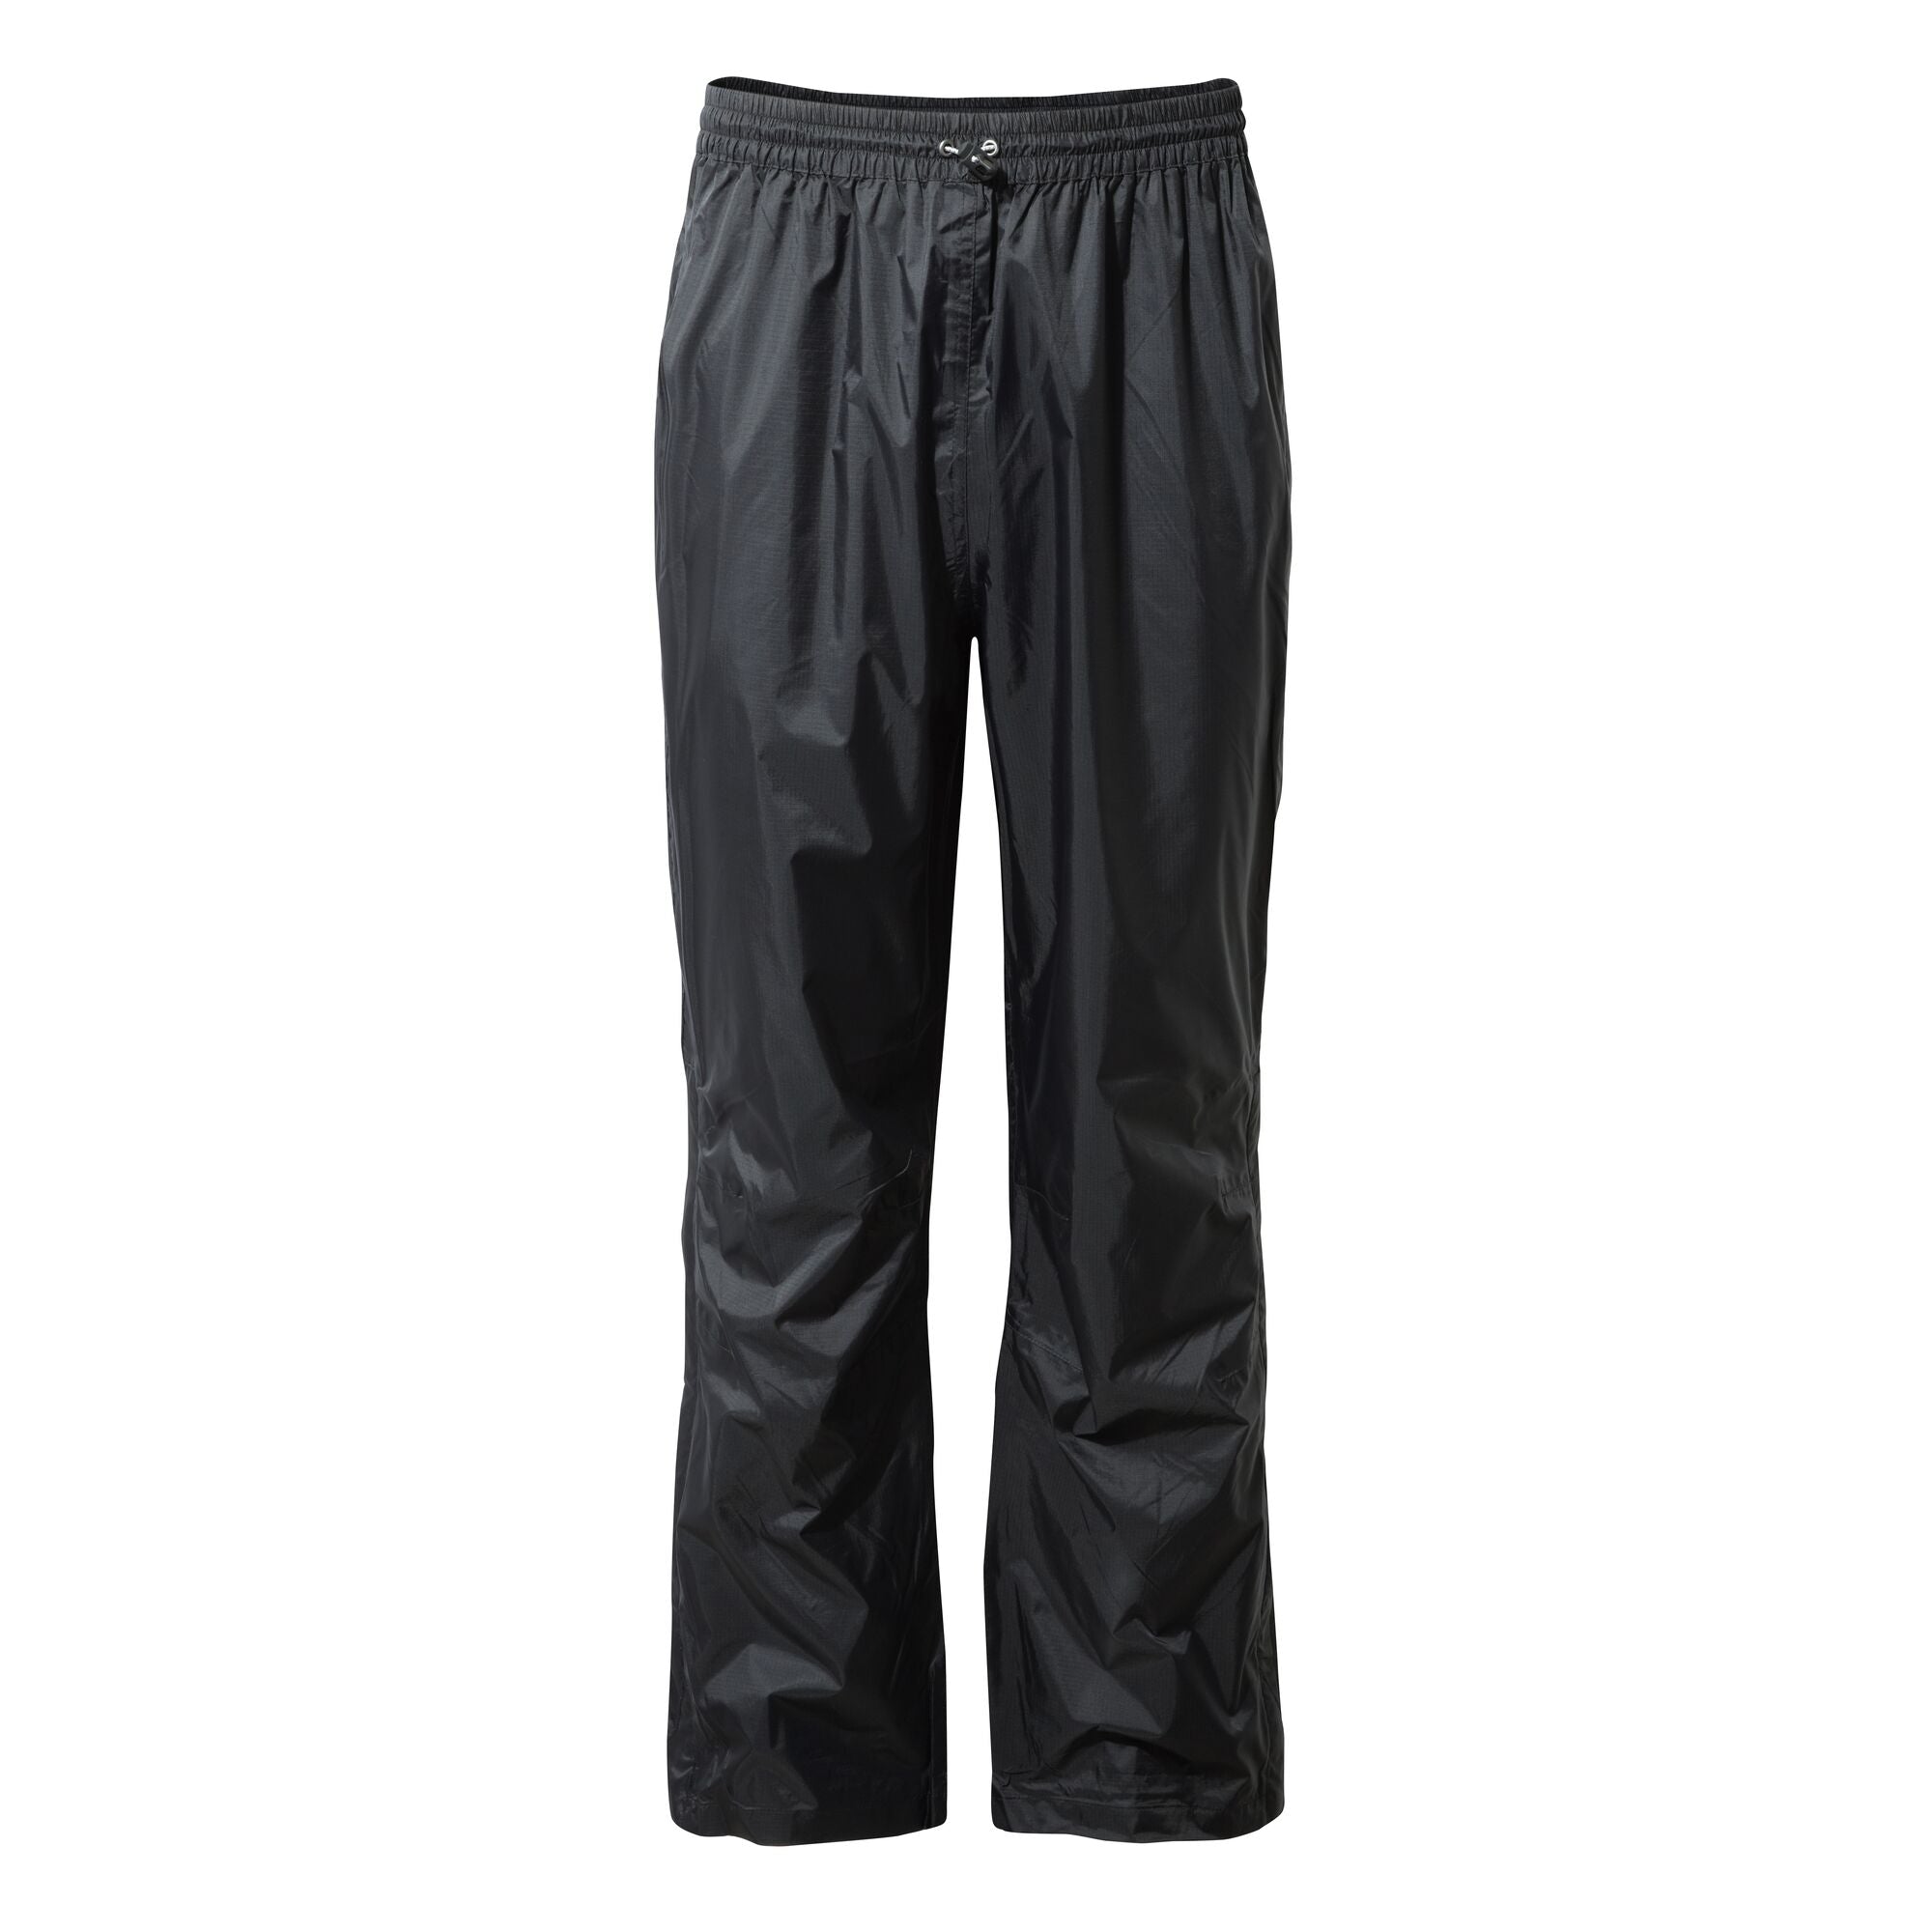 Craghoppers Ascent Over Trousers Waterproof